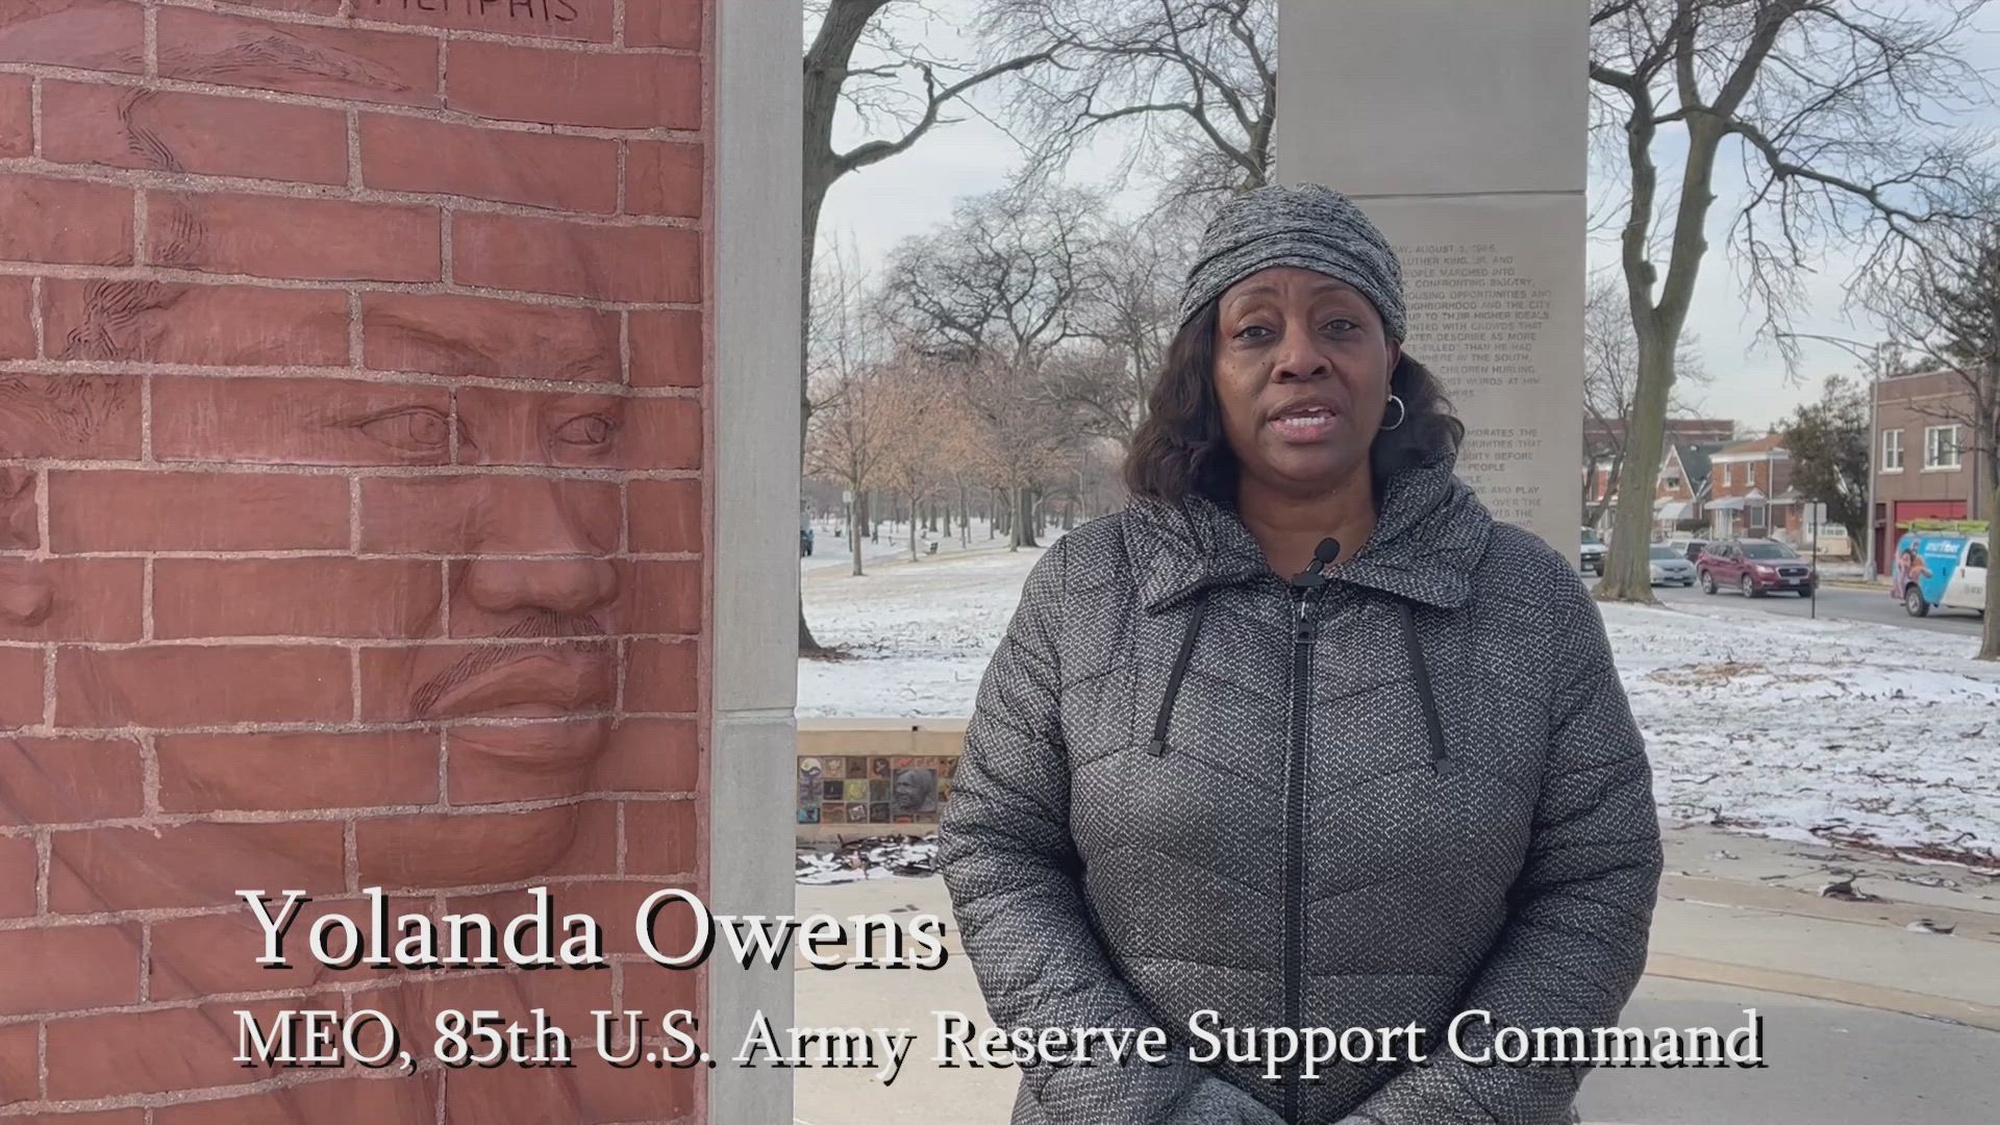 This year, Martin Luther King Jr. holiday observance falls on Monday, January 16, 2023. In this year's holiday observance video, Yolanda Owens, Military Equal Opportunity specialist for the 85th U.S. Army Reserve Support Command, discusses the Chicago Freedom Movement that Dr. King took part in that helped push the passage of the federal Fair Housing Act in 1968.
(U.S. Army Reserve video by Anthony L. Taylor)